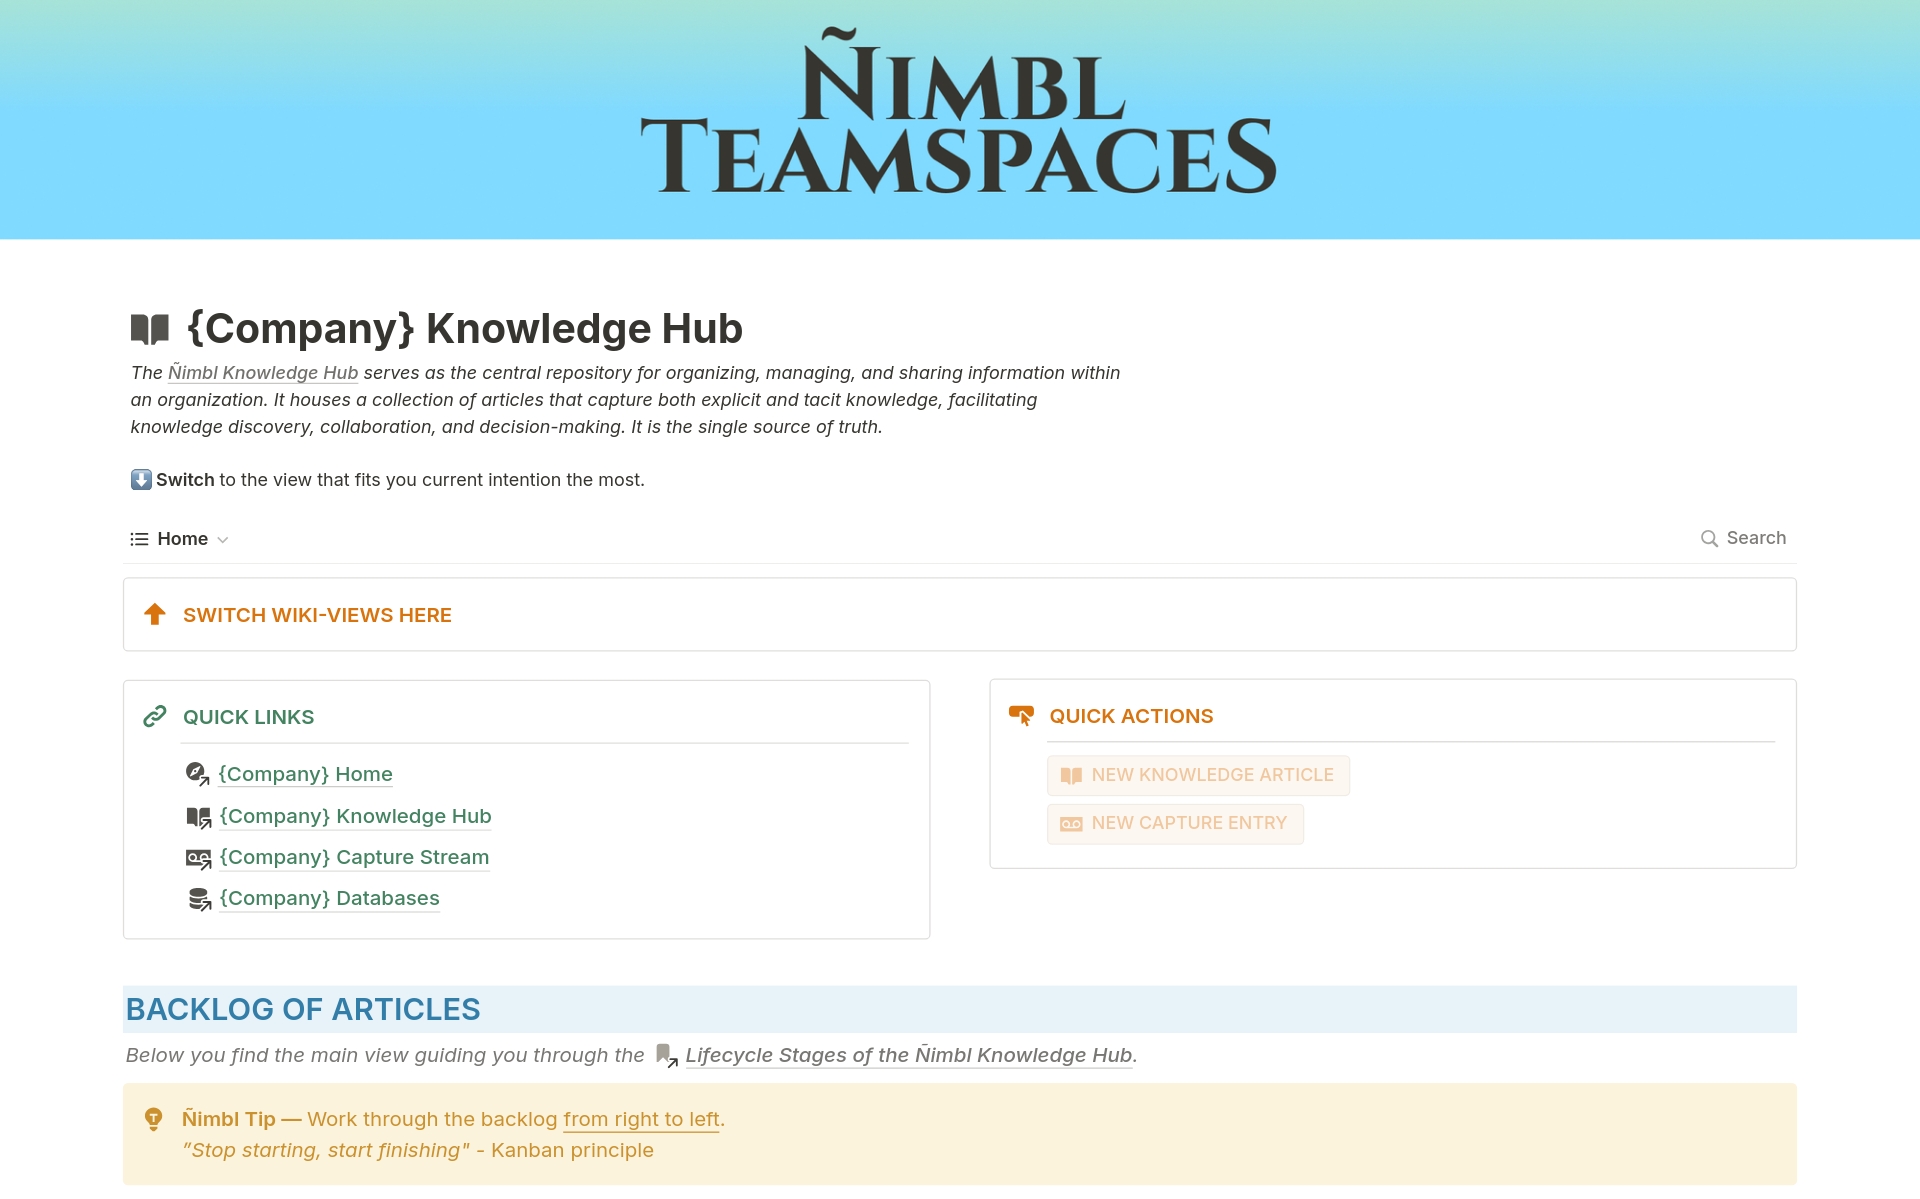 Ñimbl Teamspaces provides your Notion workspace with the foundation for effective knowledge management, fostering better thinking and collaboration – and it was built in a Startup.

